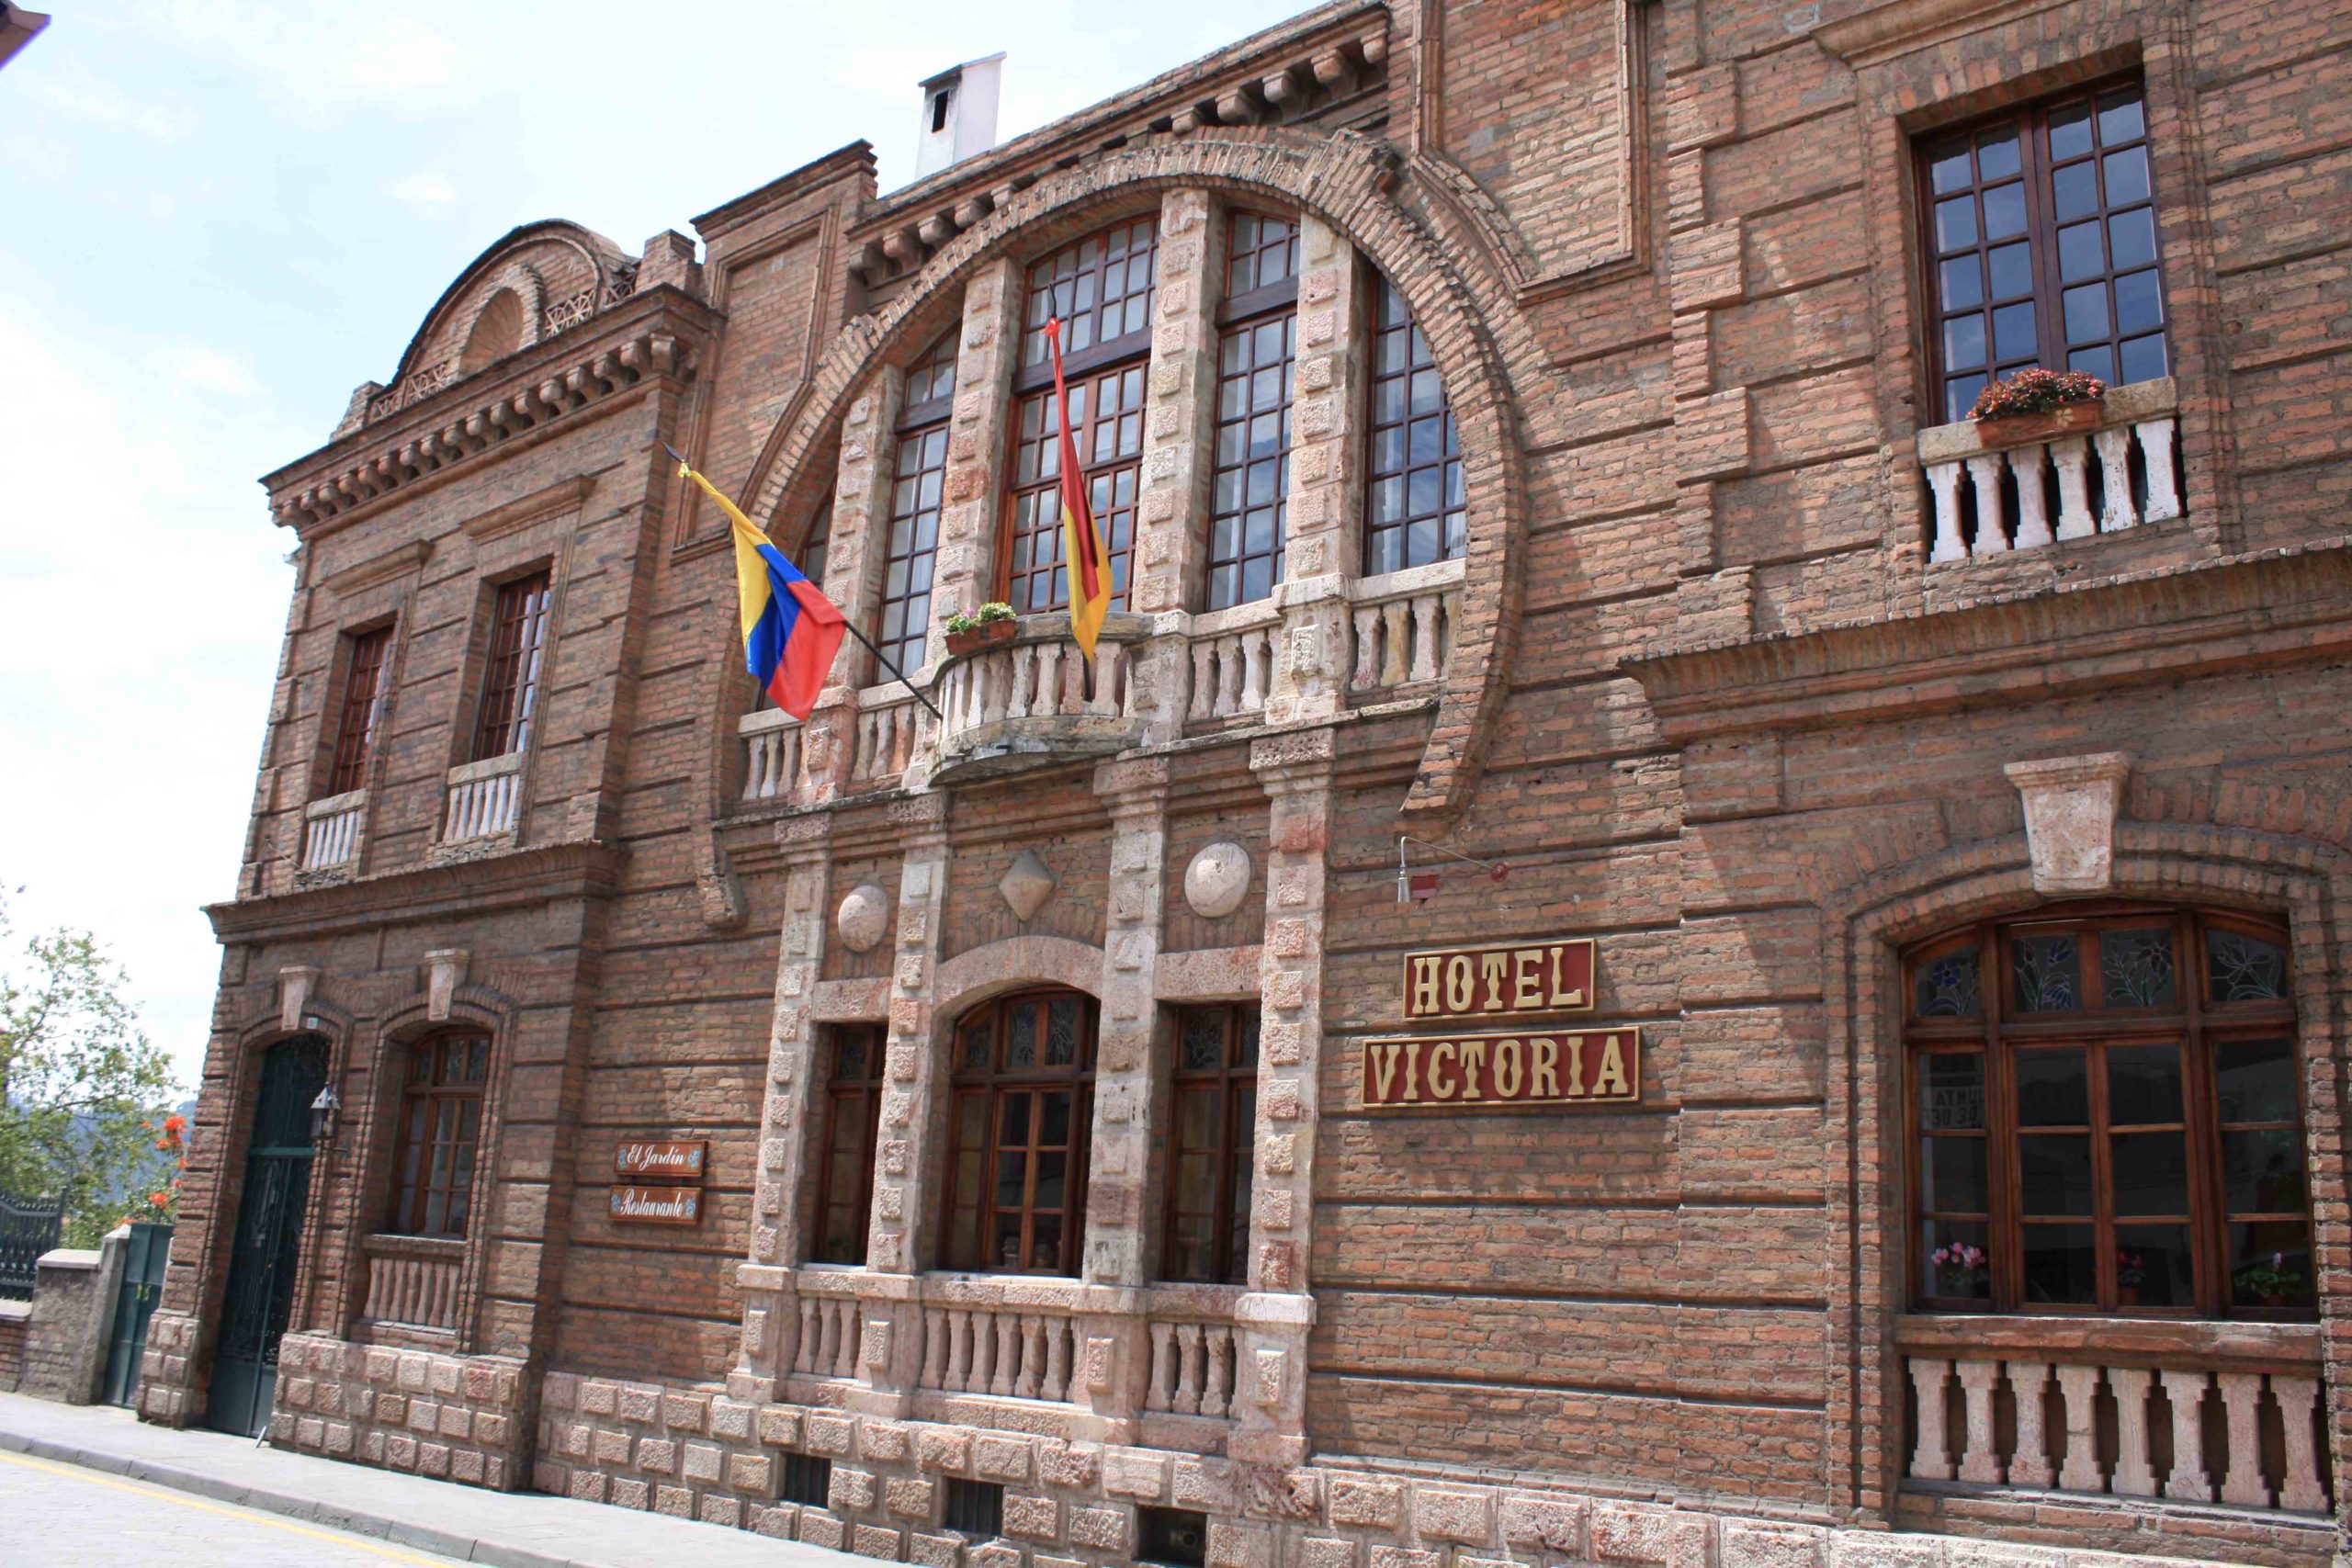 Cuenca hotels experienced a 70% occupancy rate during Carnival